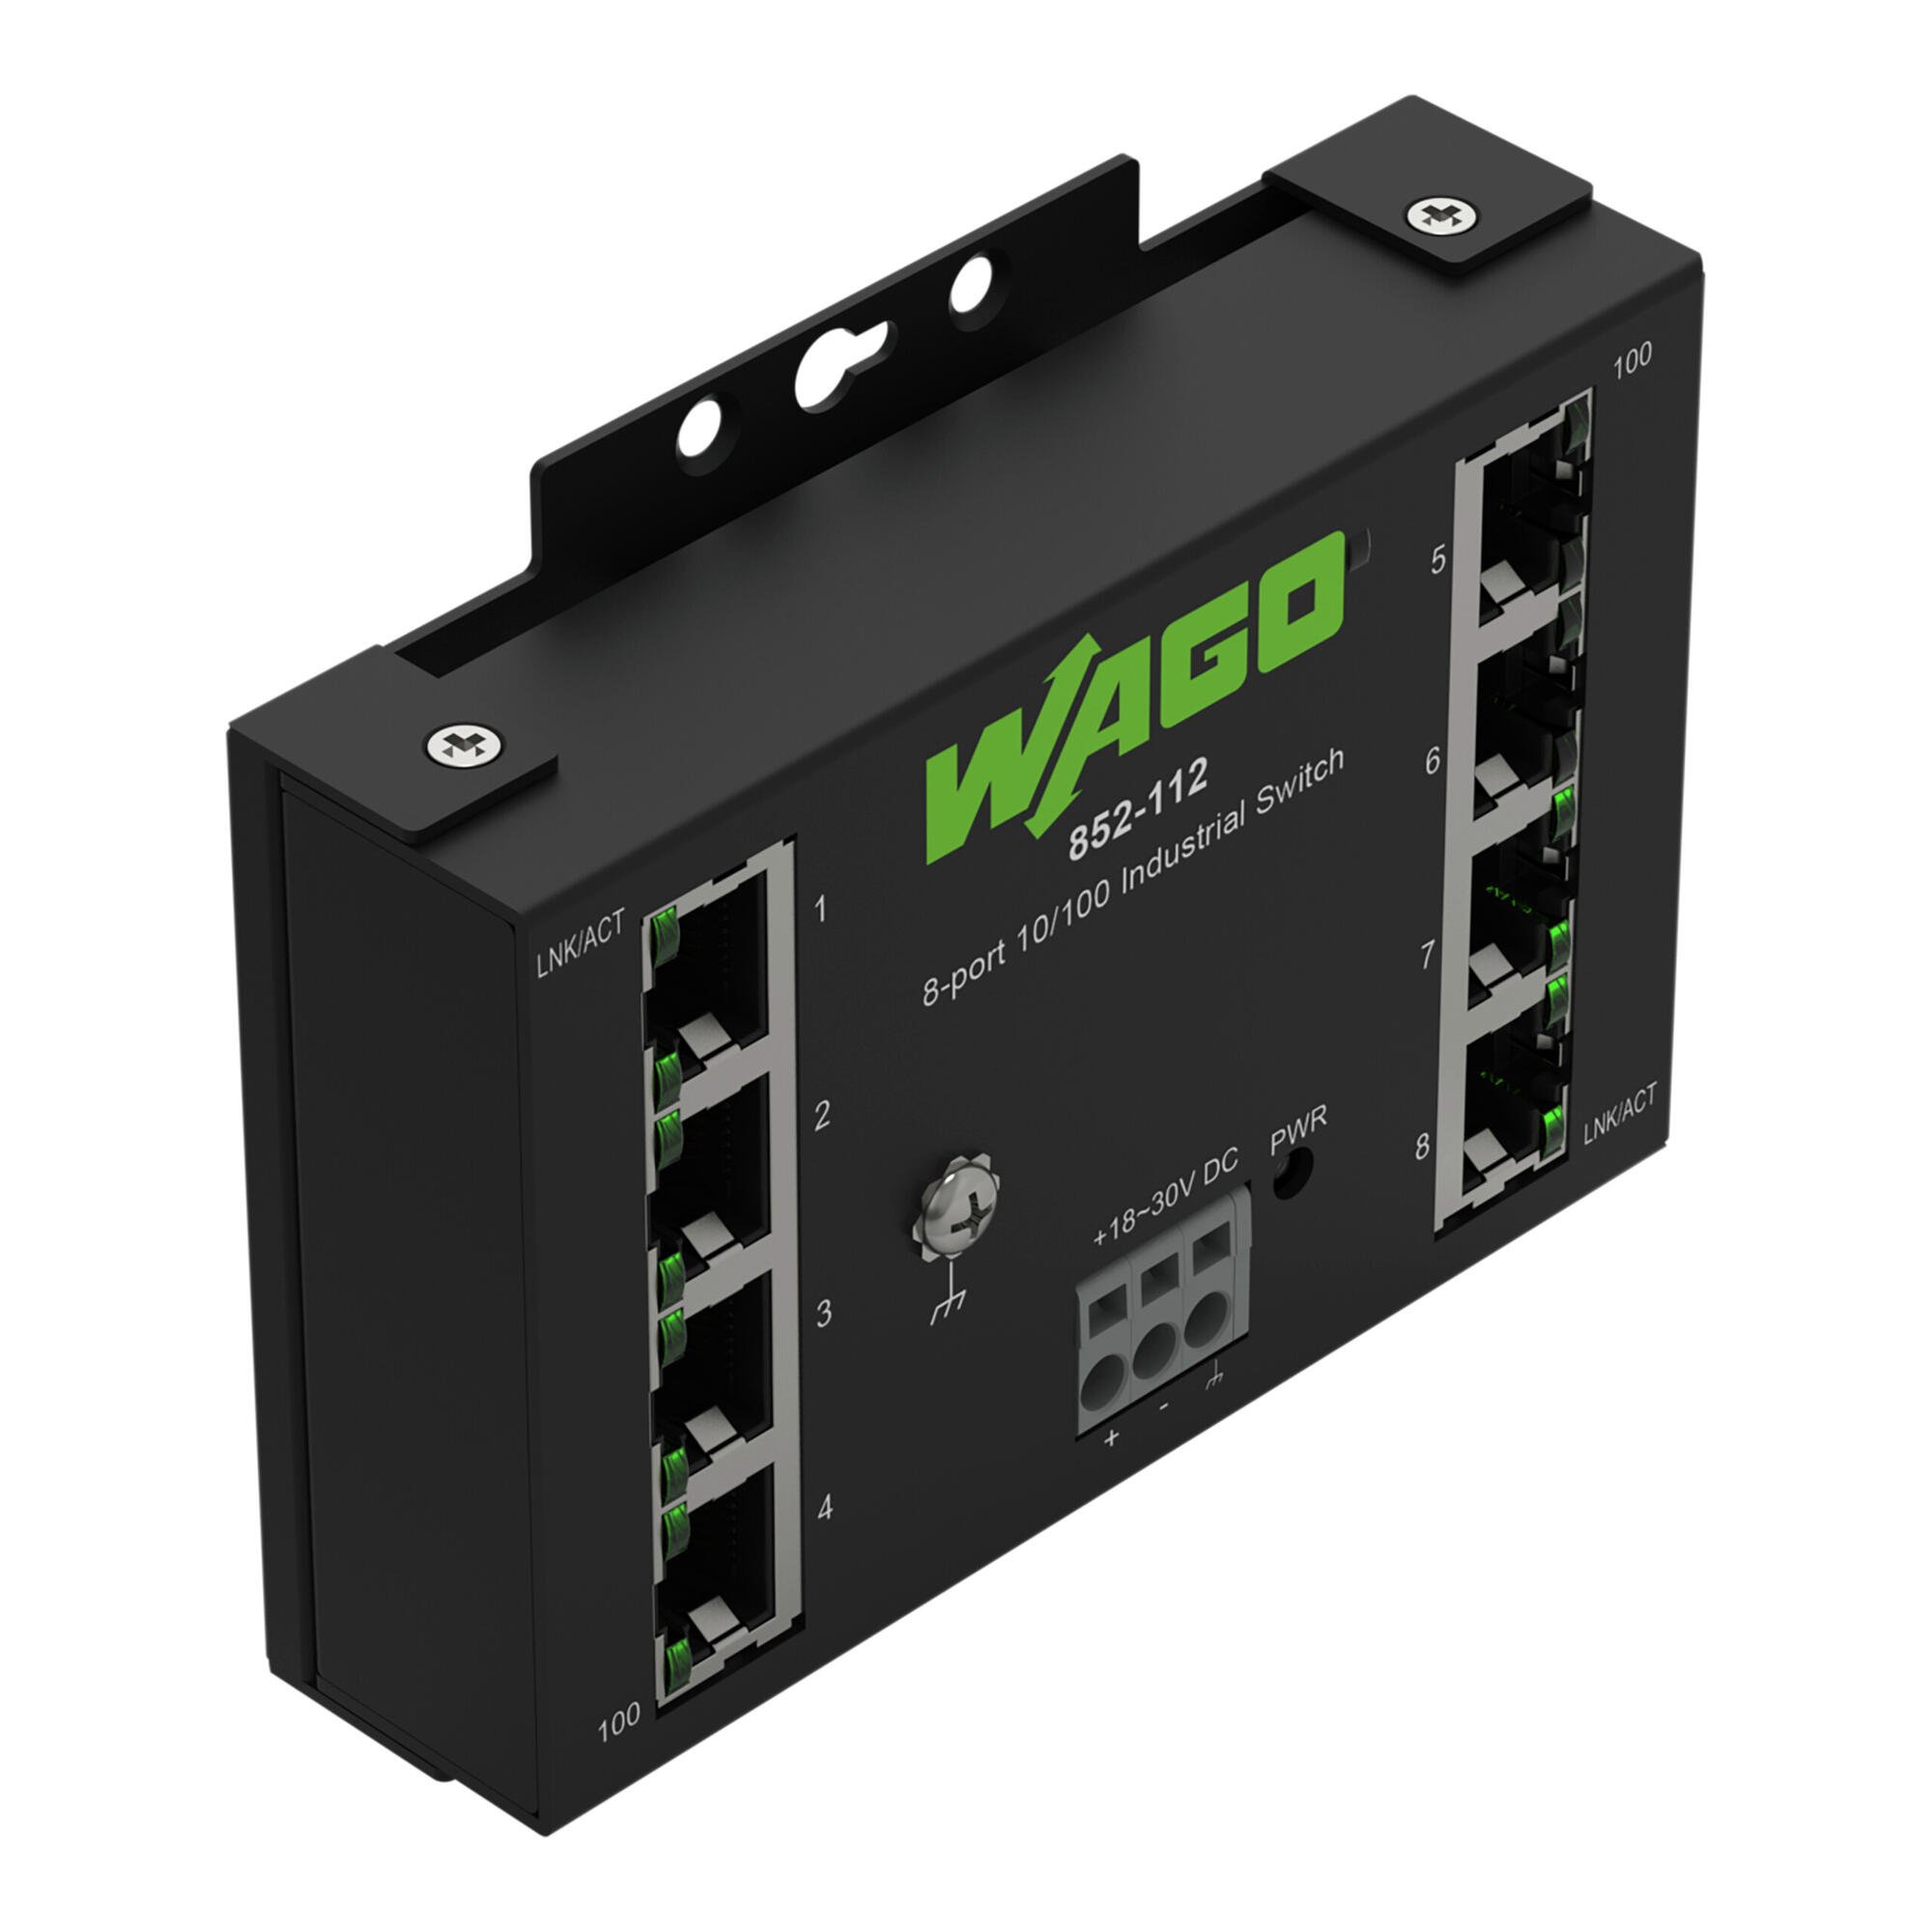 Industrial-ECO-Switch; 8-port 100Base-TX; black